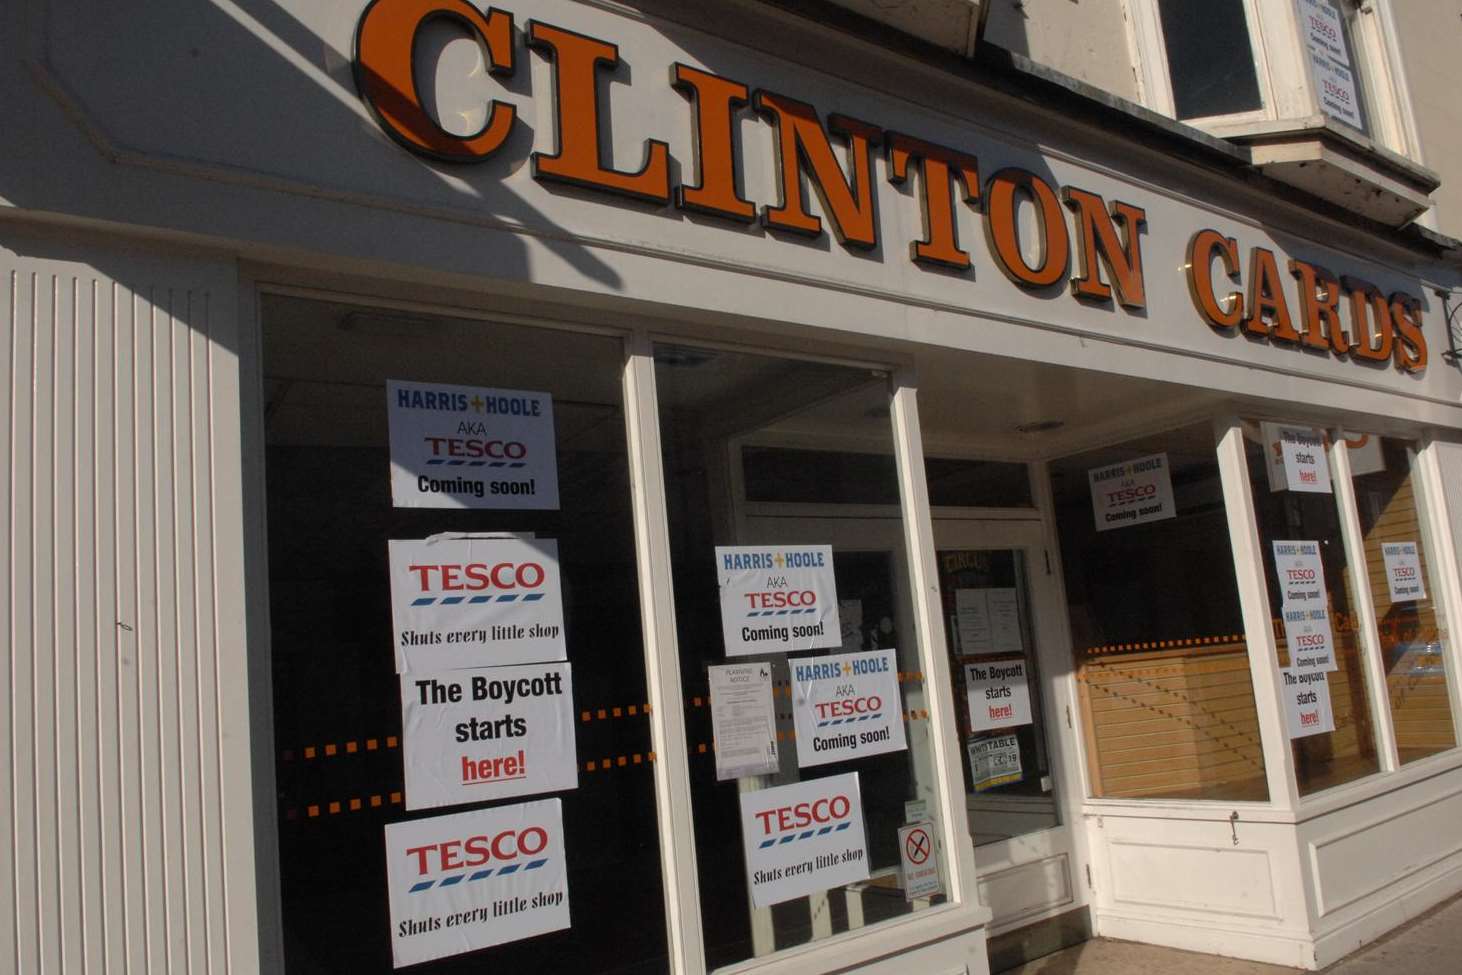 The former Clinton Cards shop was covered in anti-Tesco posters